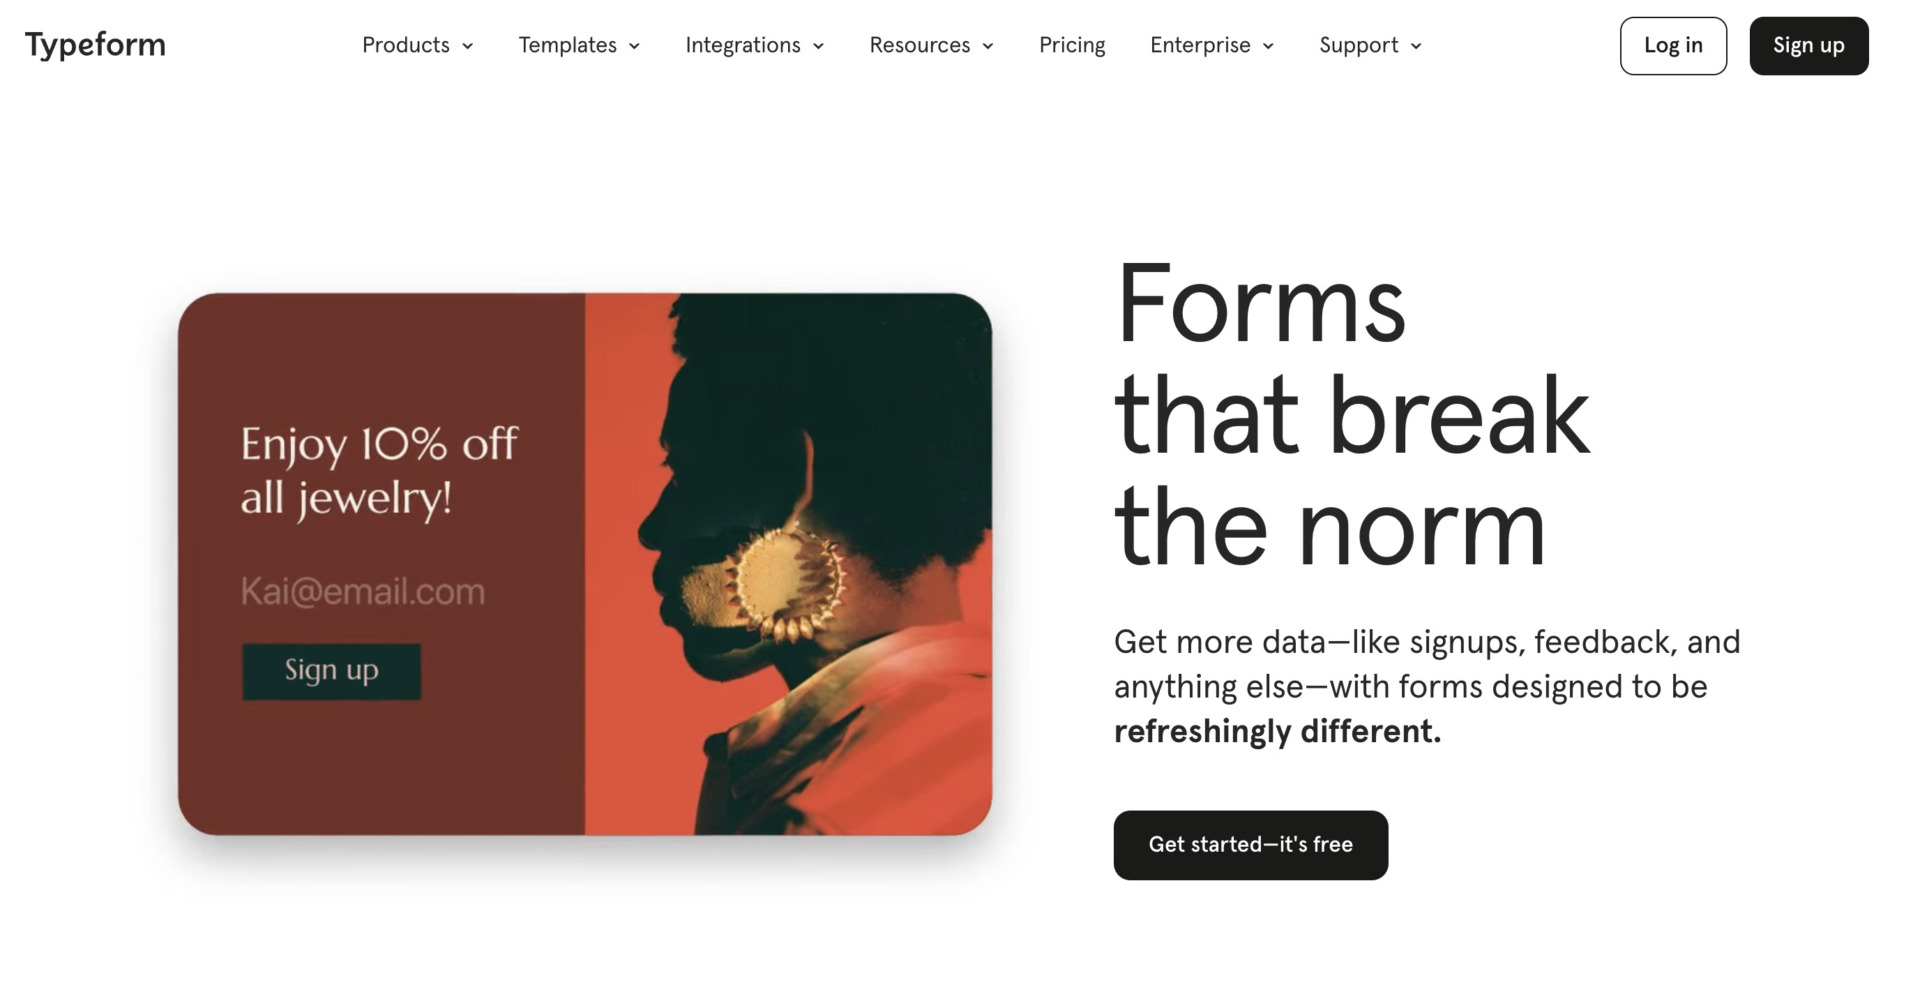 Top page of Typeform